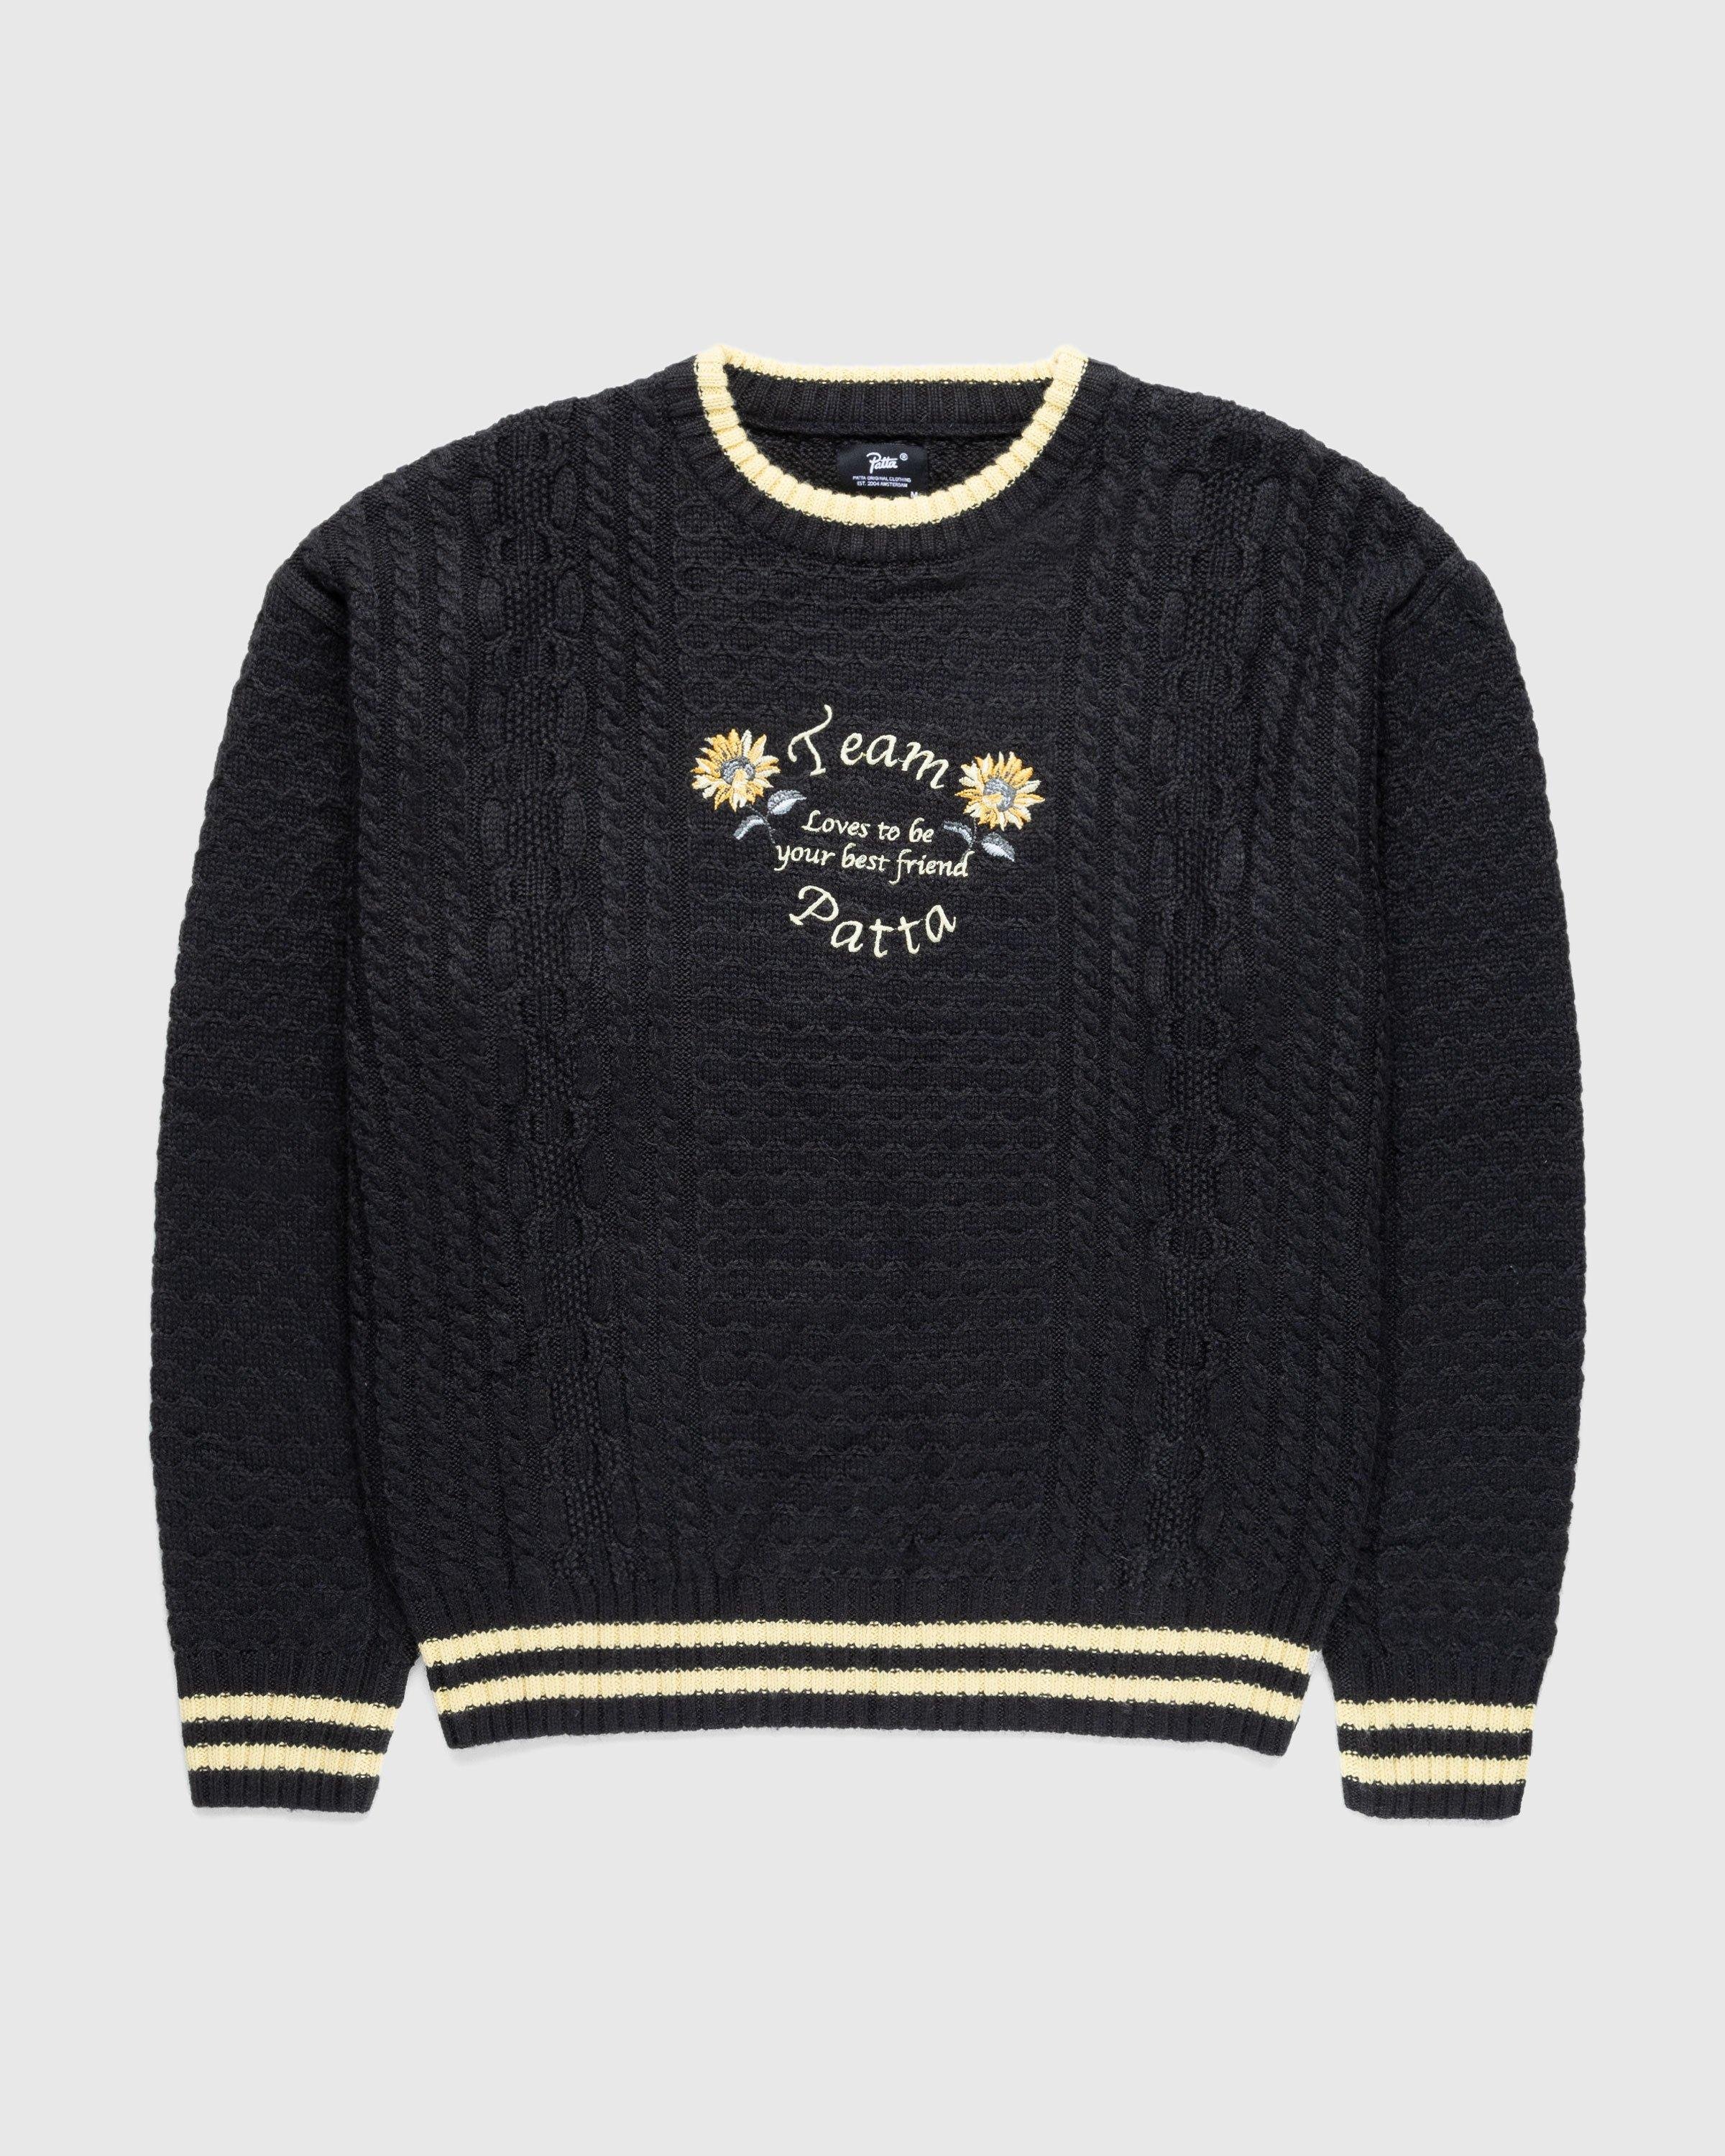 PattaLoves You Cable Knitted Sweater Pirate Black by HIGHSNOBIETY